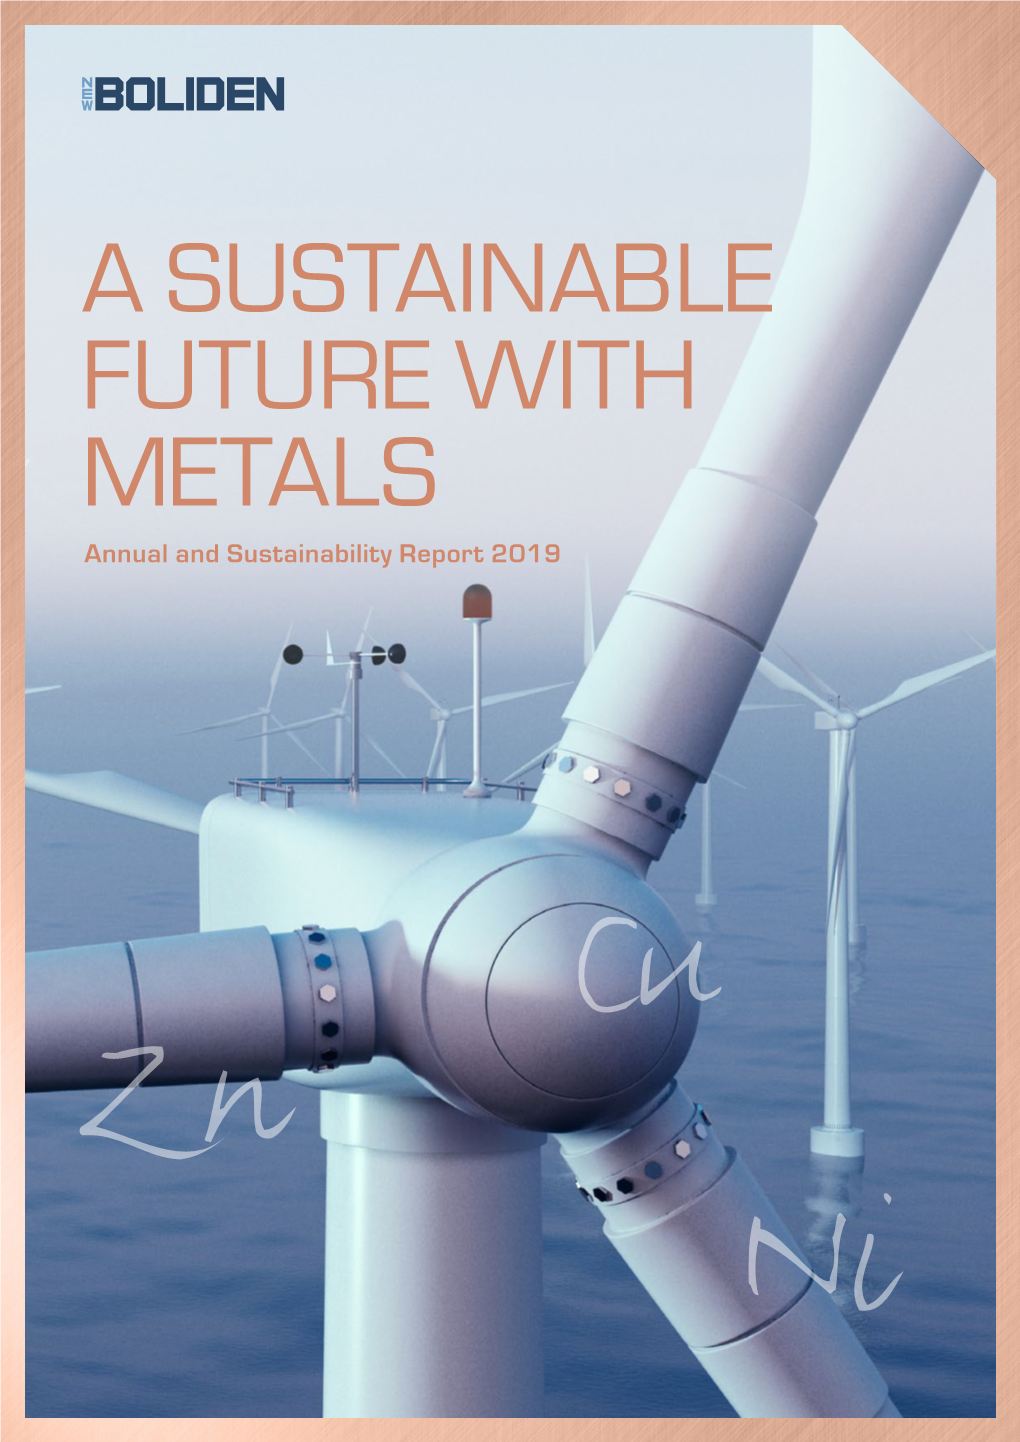 Annual and Sustainability Report 2019